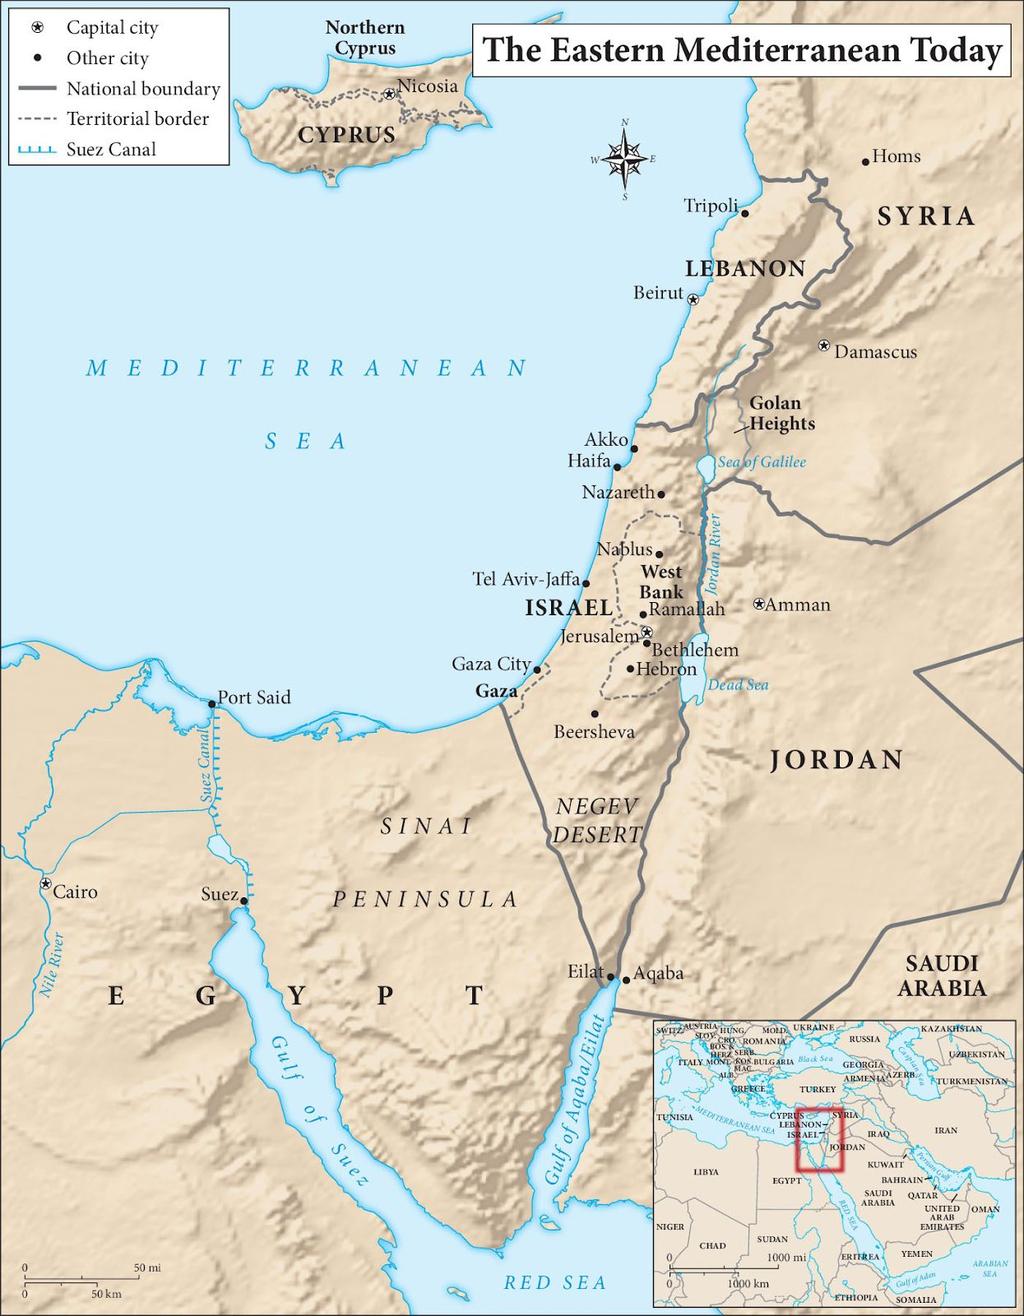 16 Figure 1: Map of the Middle East (Eastern Mediterranean) as of 2017 16 "The Eastern